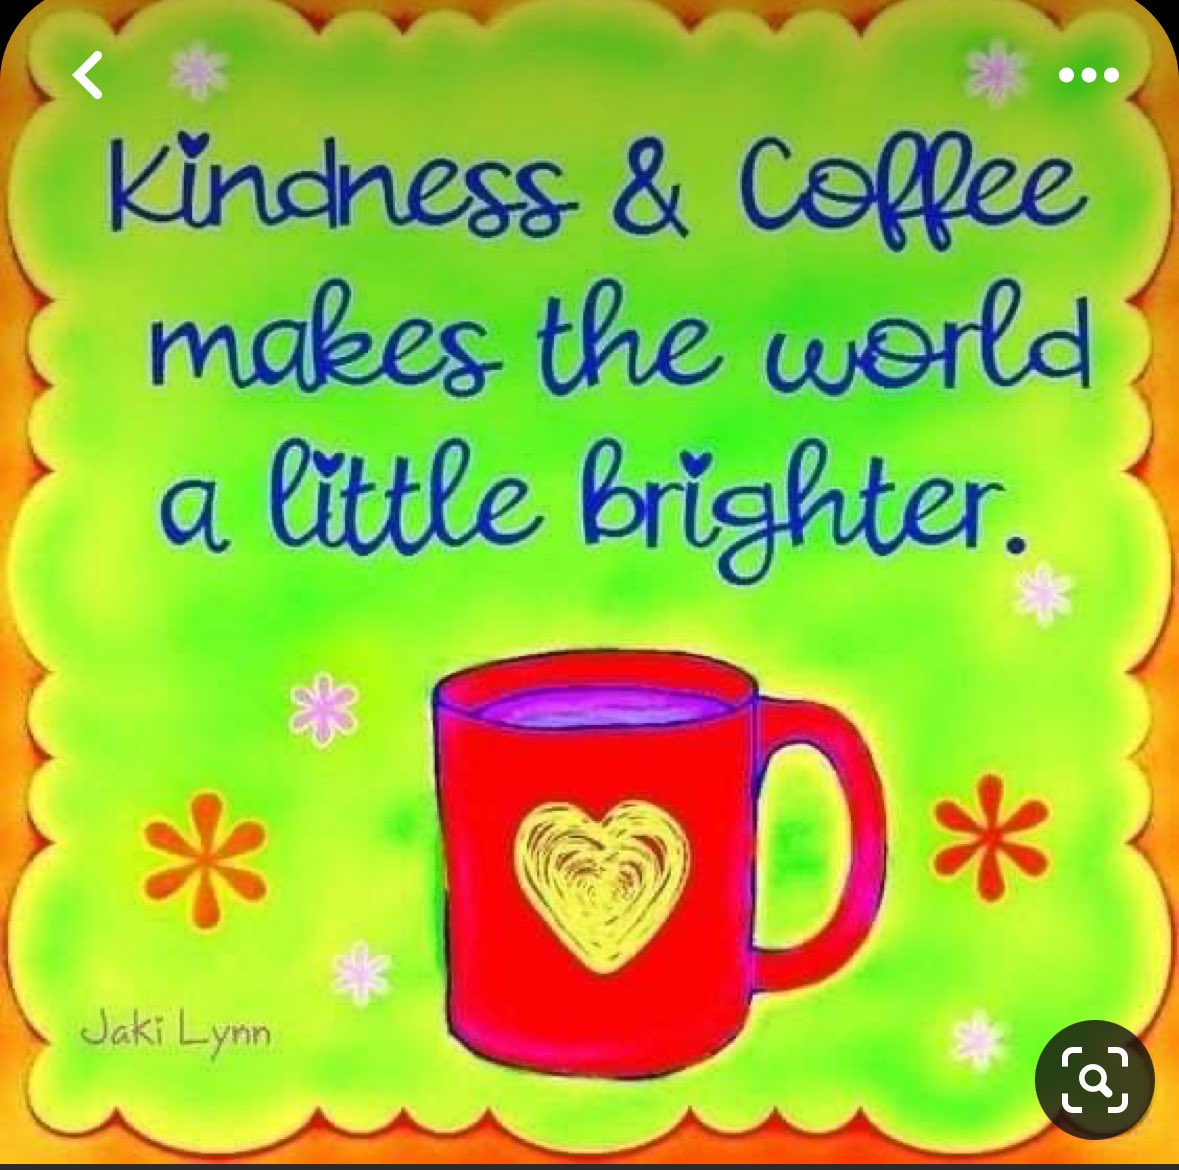 Good morning everyone. Gonna be a rainy day. Glad I took advantage of the beautiful day yesterday. Smile and enjoy the day 🥰☔️☕️